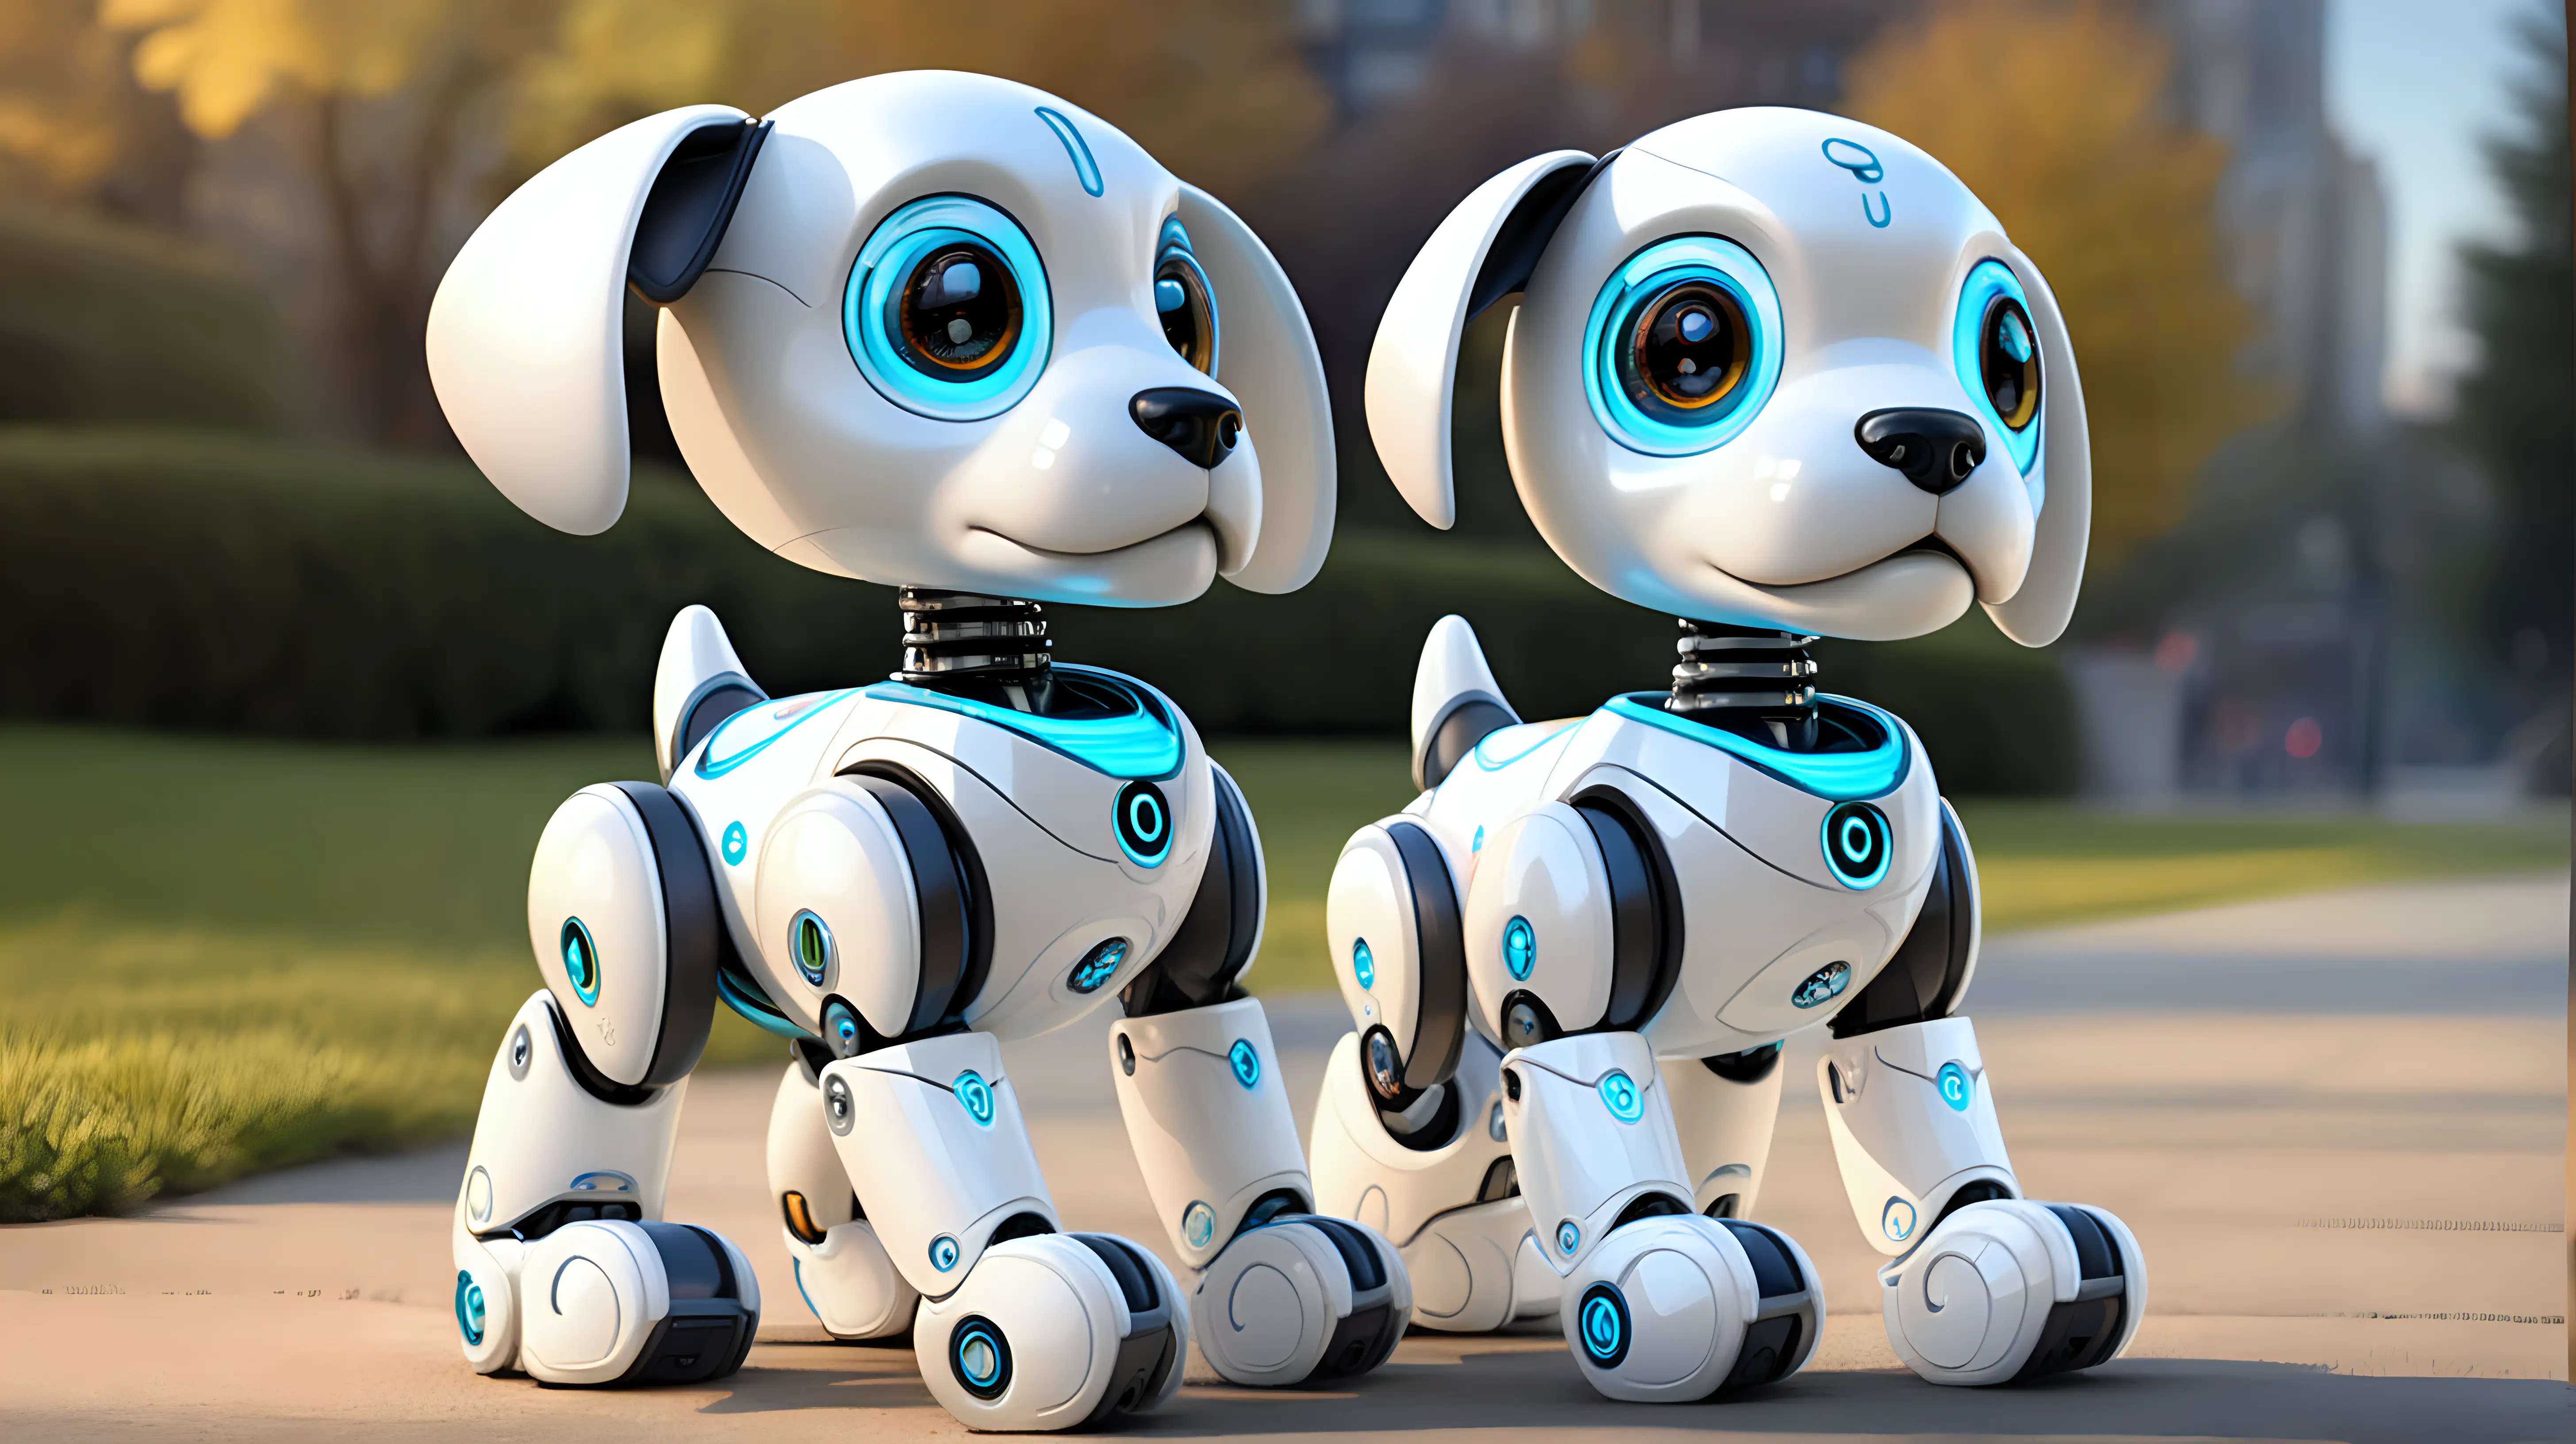 Adorable Cartoon Robot Puppy A Sweet and Inquisitive Companion for Emotional Bonding